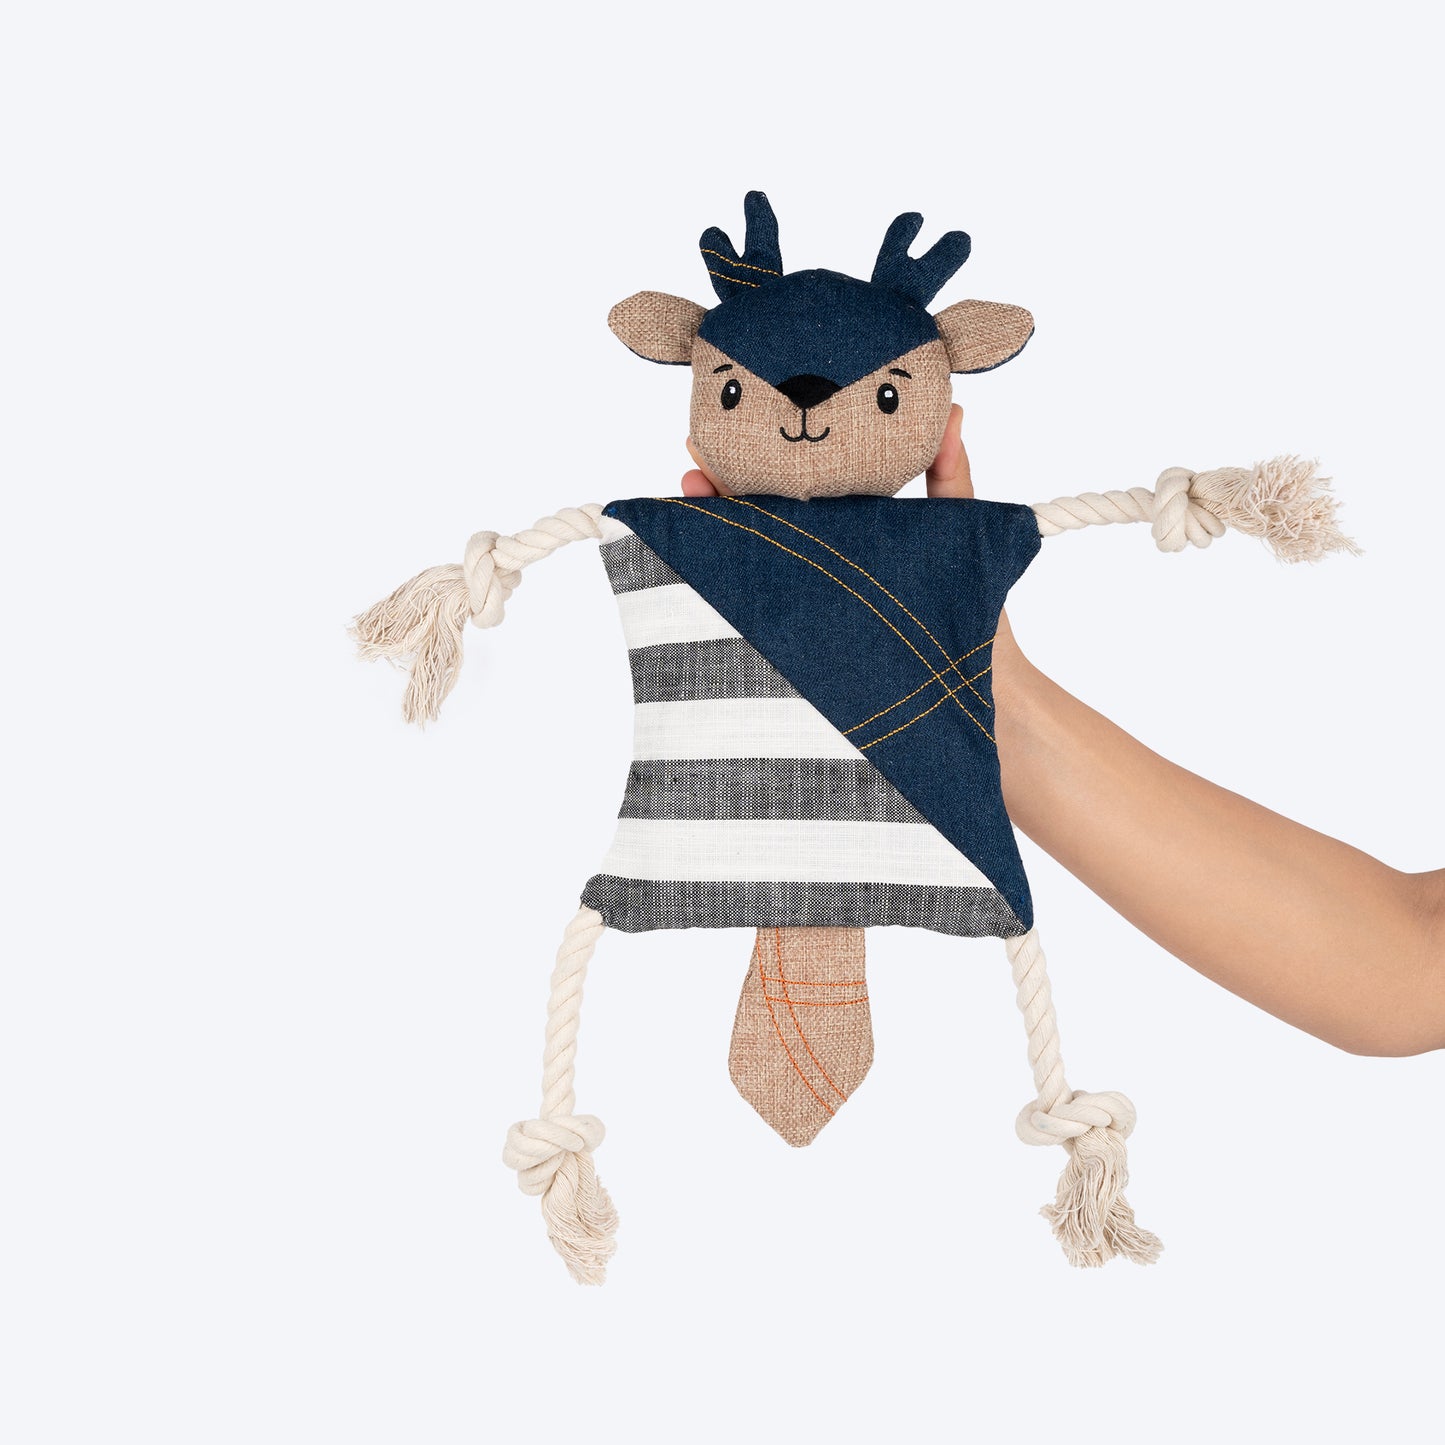 HUFT Jean Deer With Rope Plush Toy For Dog - Navy Blue - Heads Up For Tails